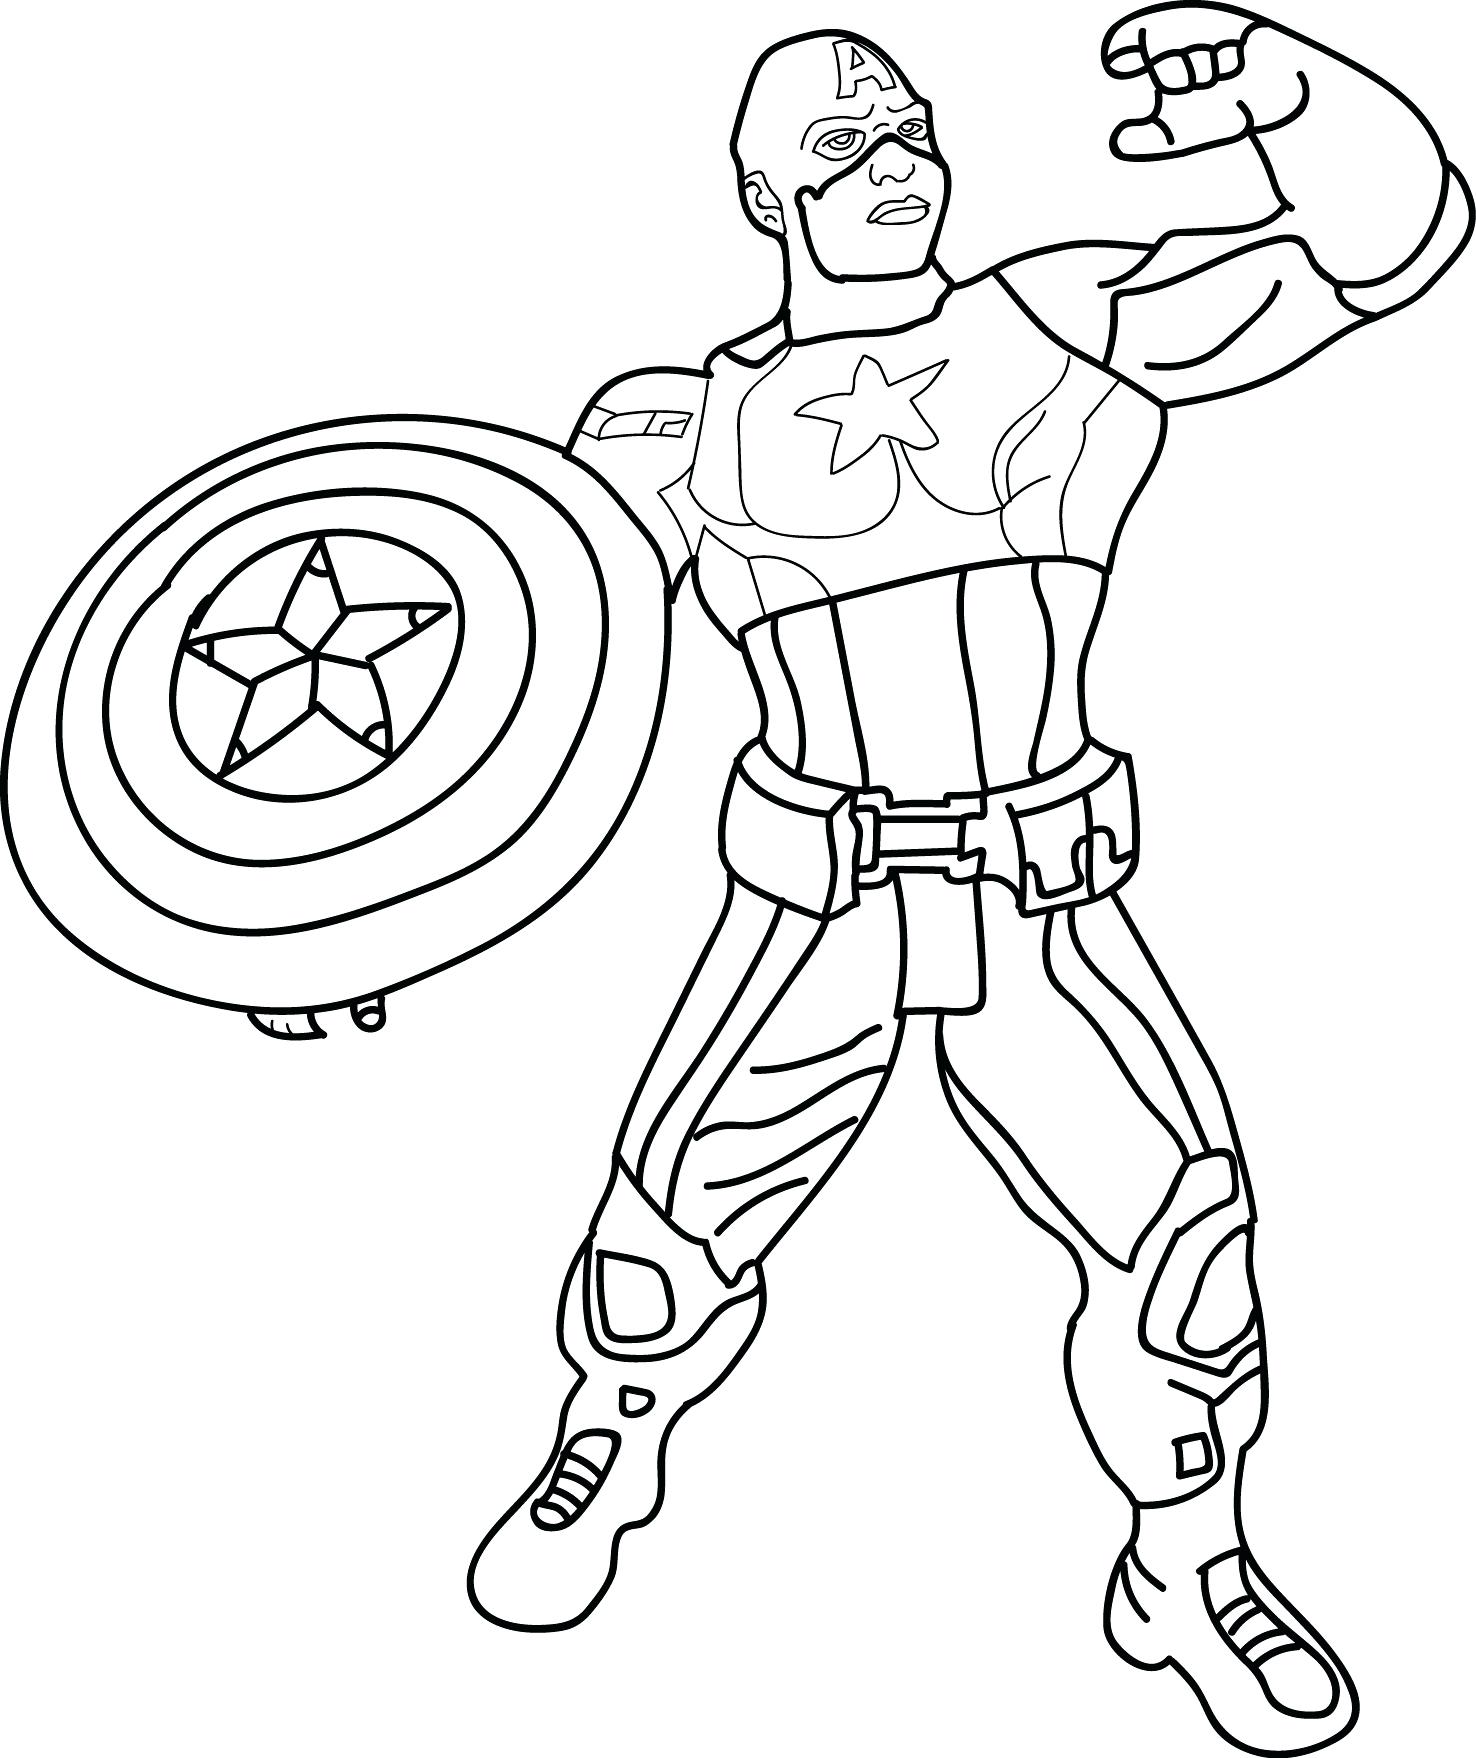 Avengers Drawing For Kids at GetDrawings | Free download